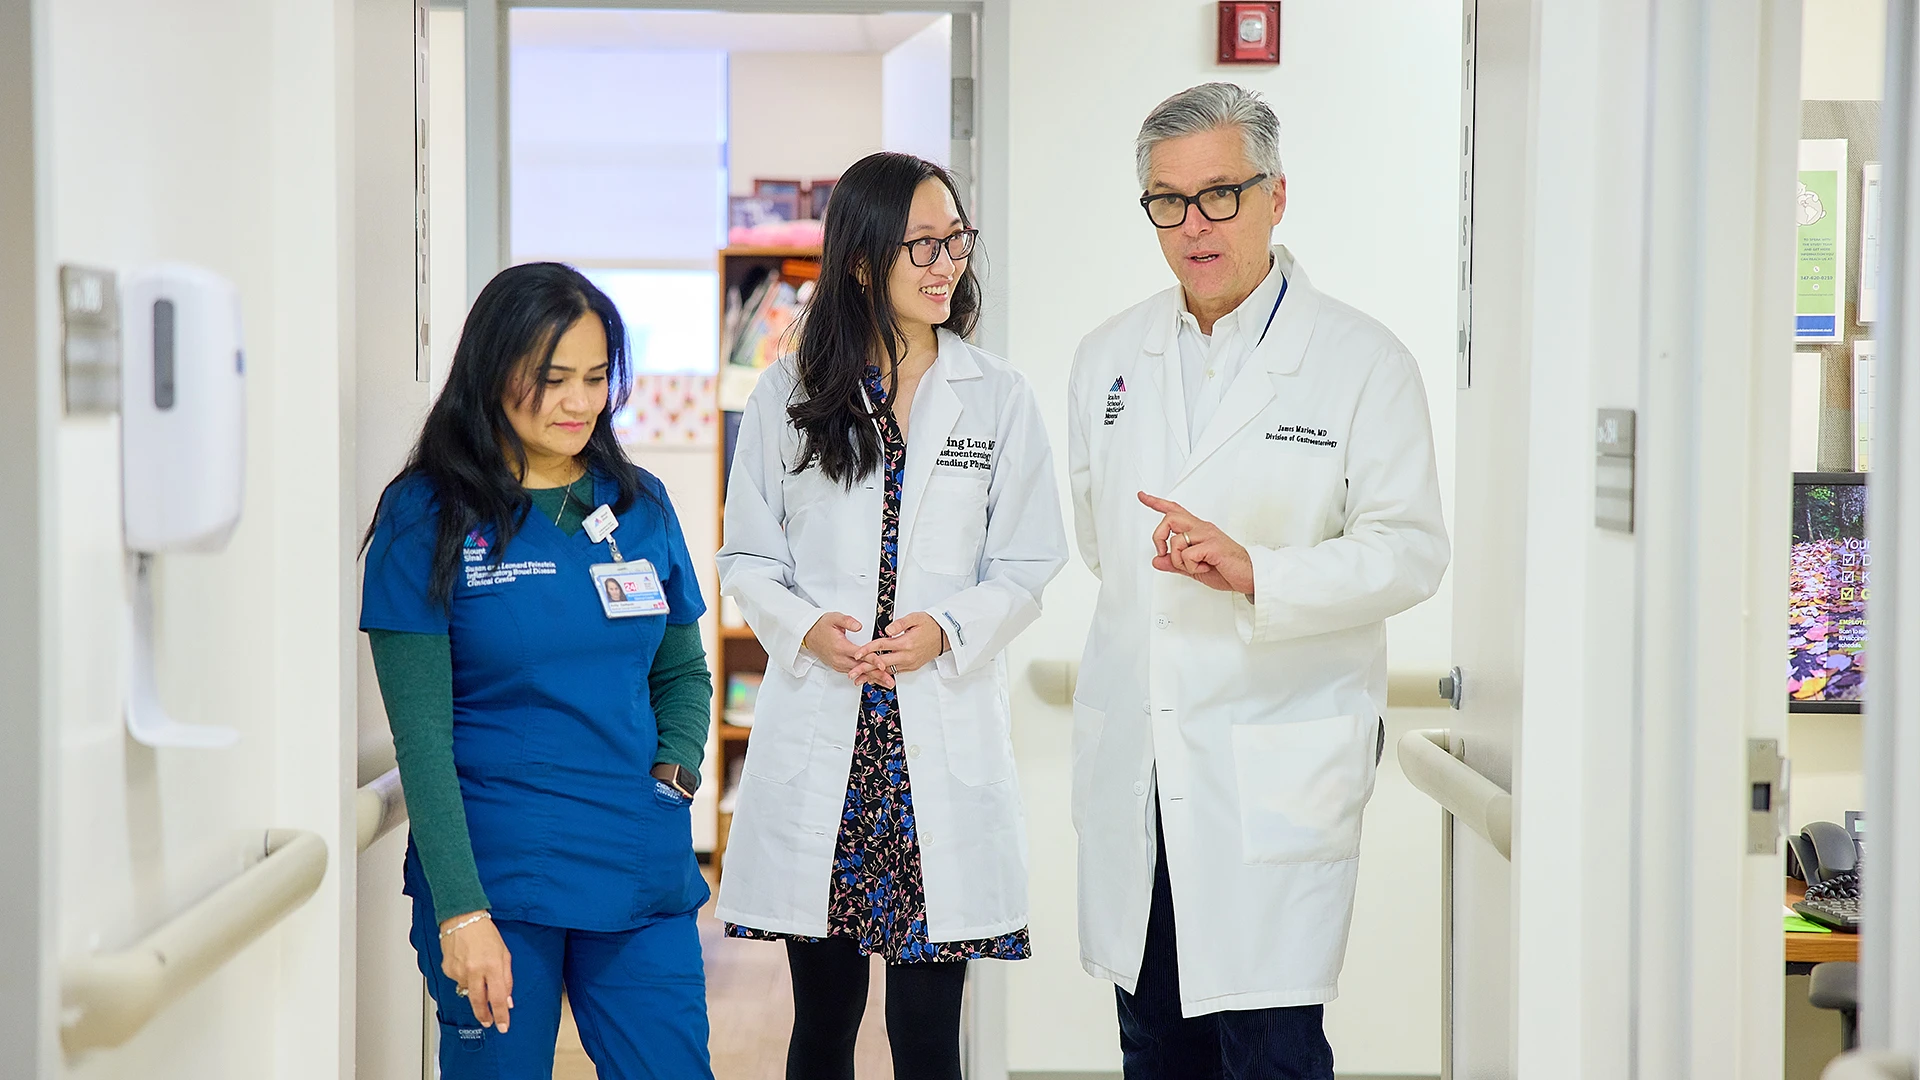 Yuying Luo, MD, center, discusses a DGBI case with medical assistant Anita Gadtaula and James F. Marion, MD, a Mount Sinai gastroenterologist.